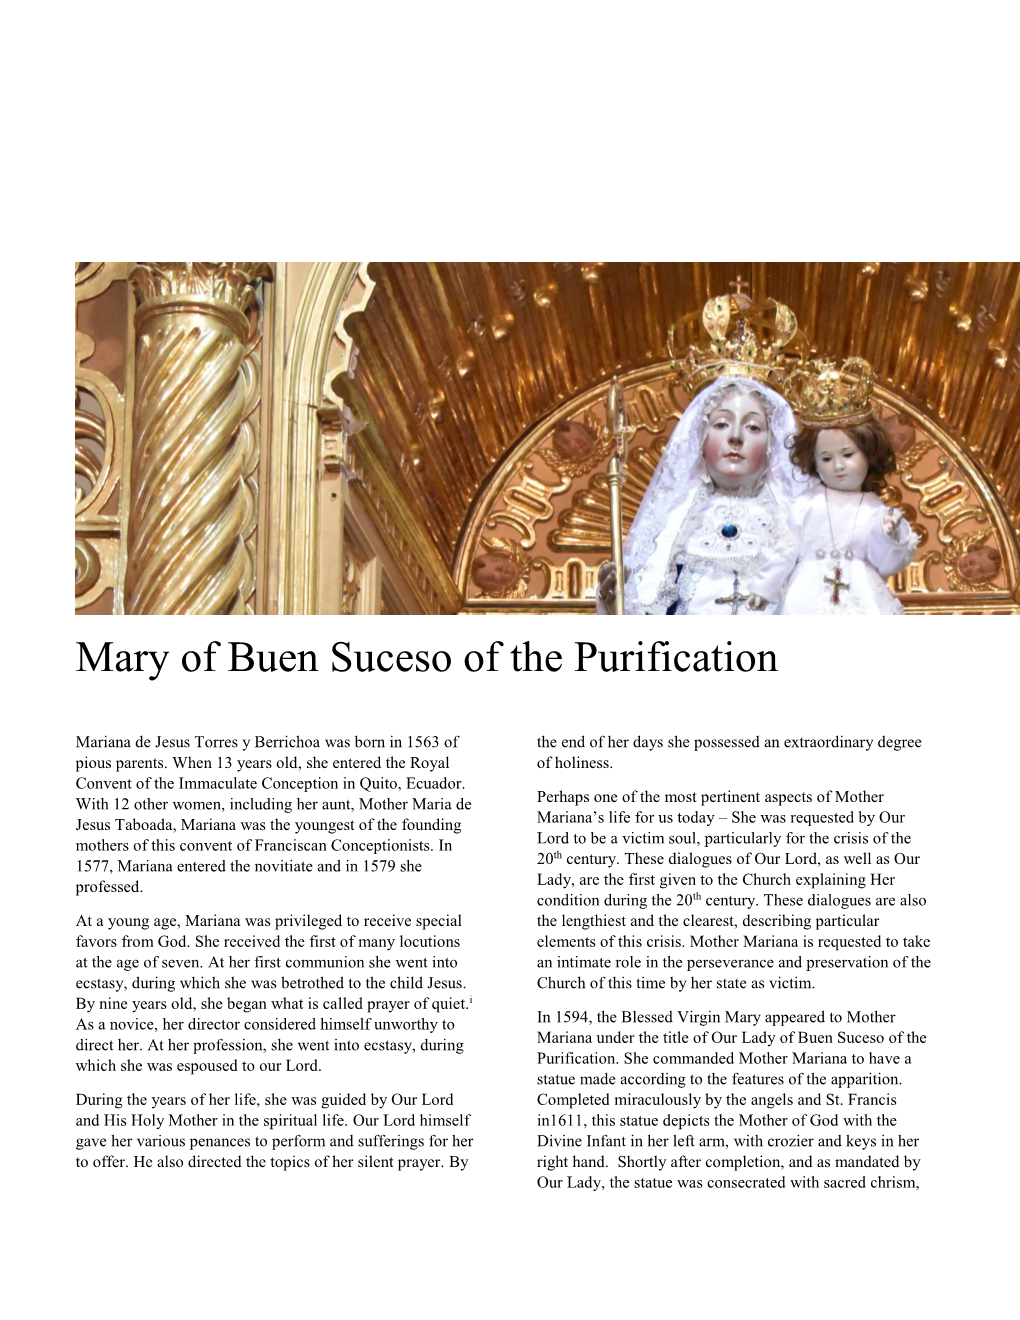 Mary of Buen Suceso of the Purification